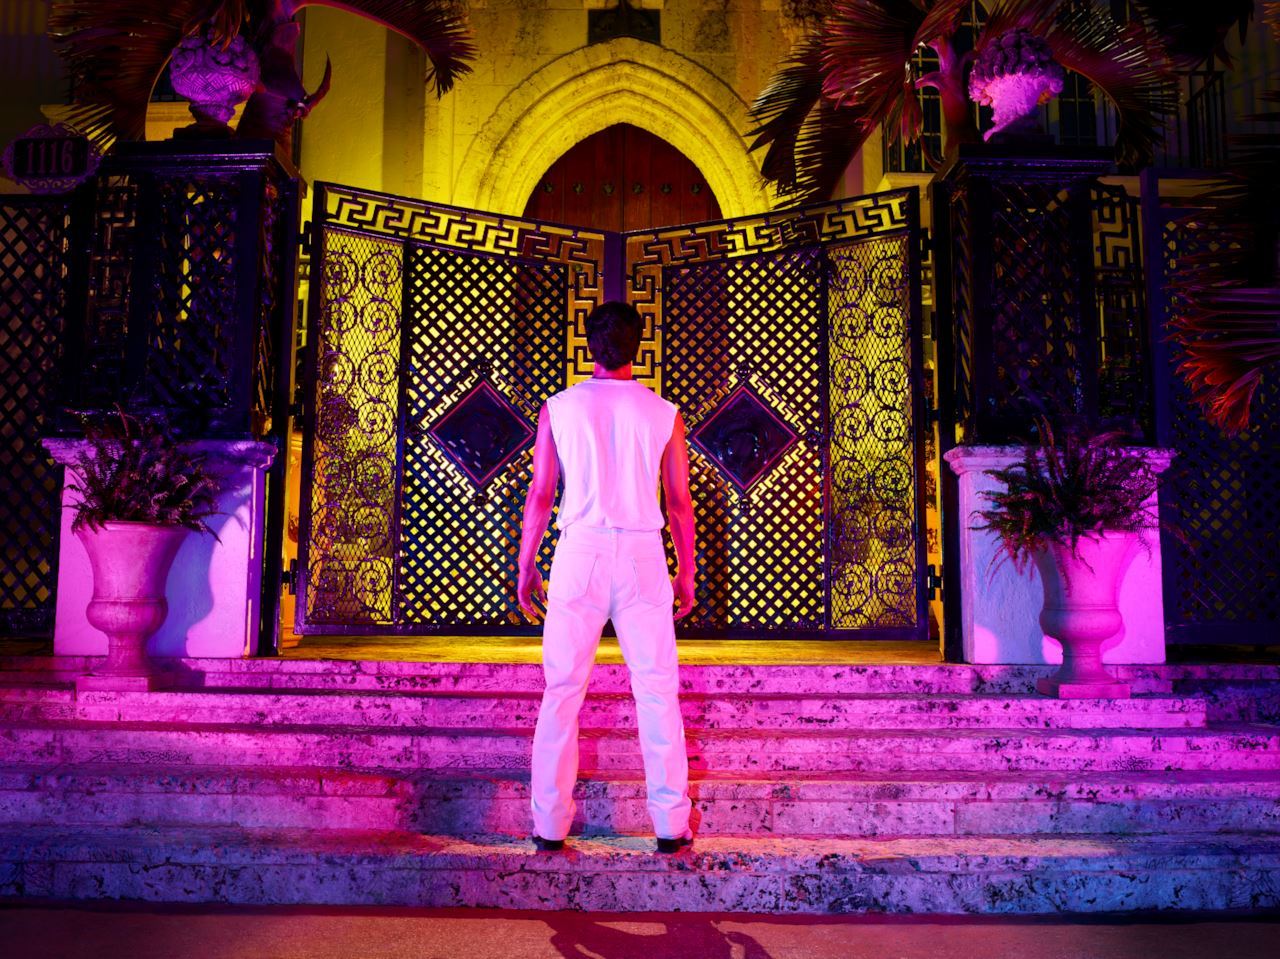 imstillhere - The Assassination of Gianni Versace:  American Crime Story - Page 10 Tumblr_p0dcpp06uF1wcyxsbo1_1280